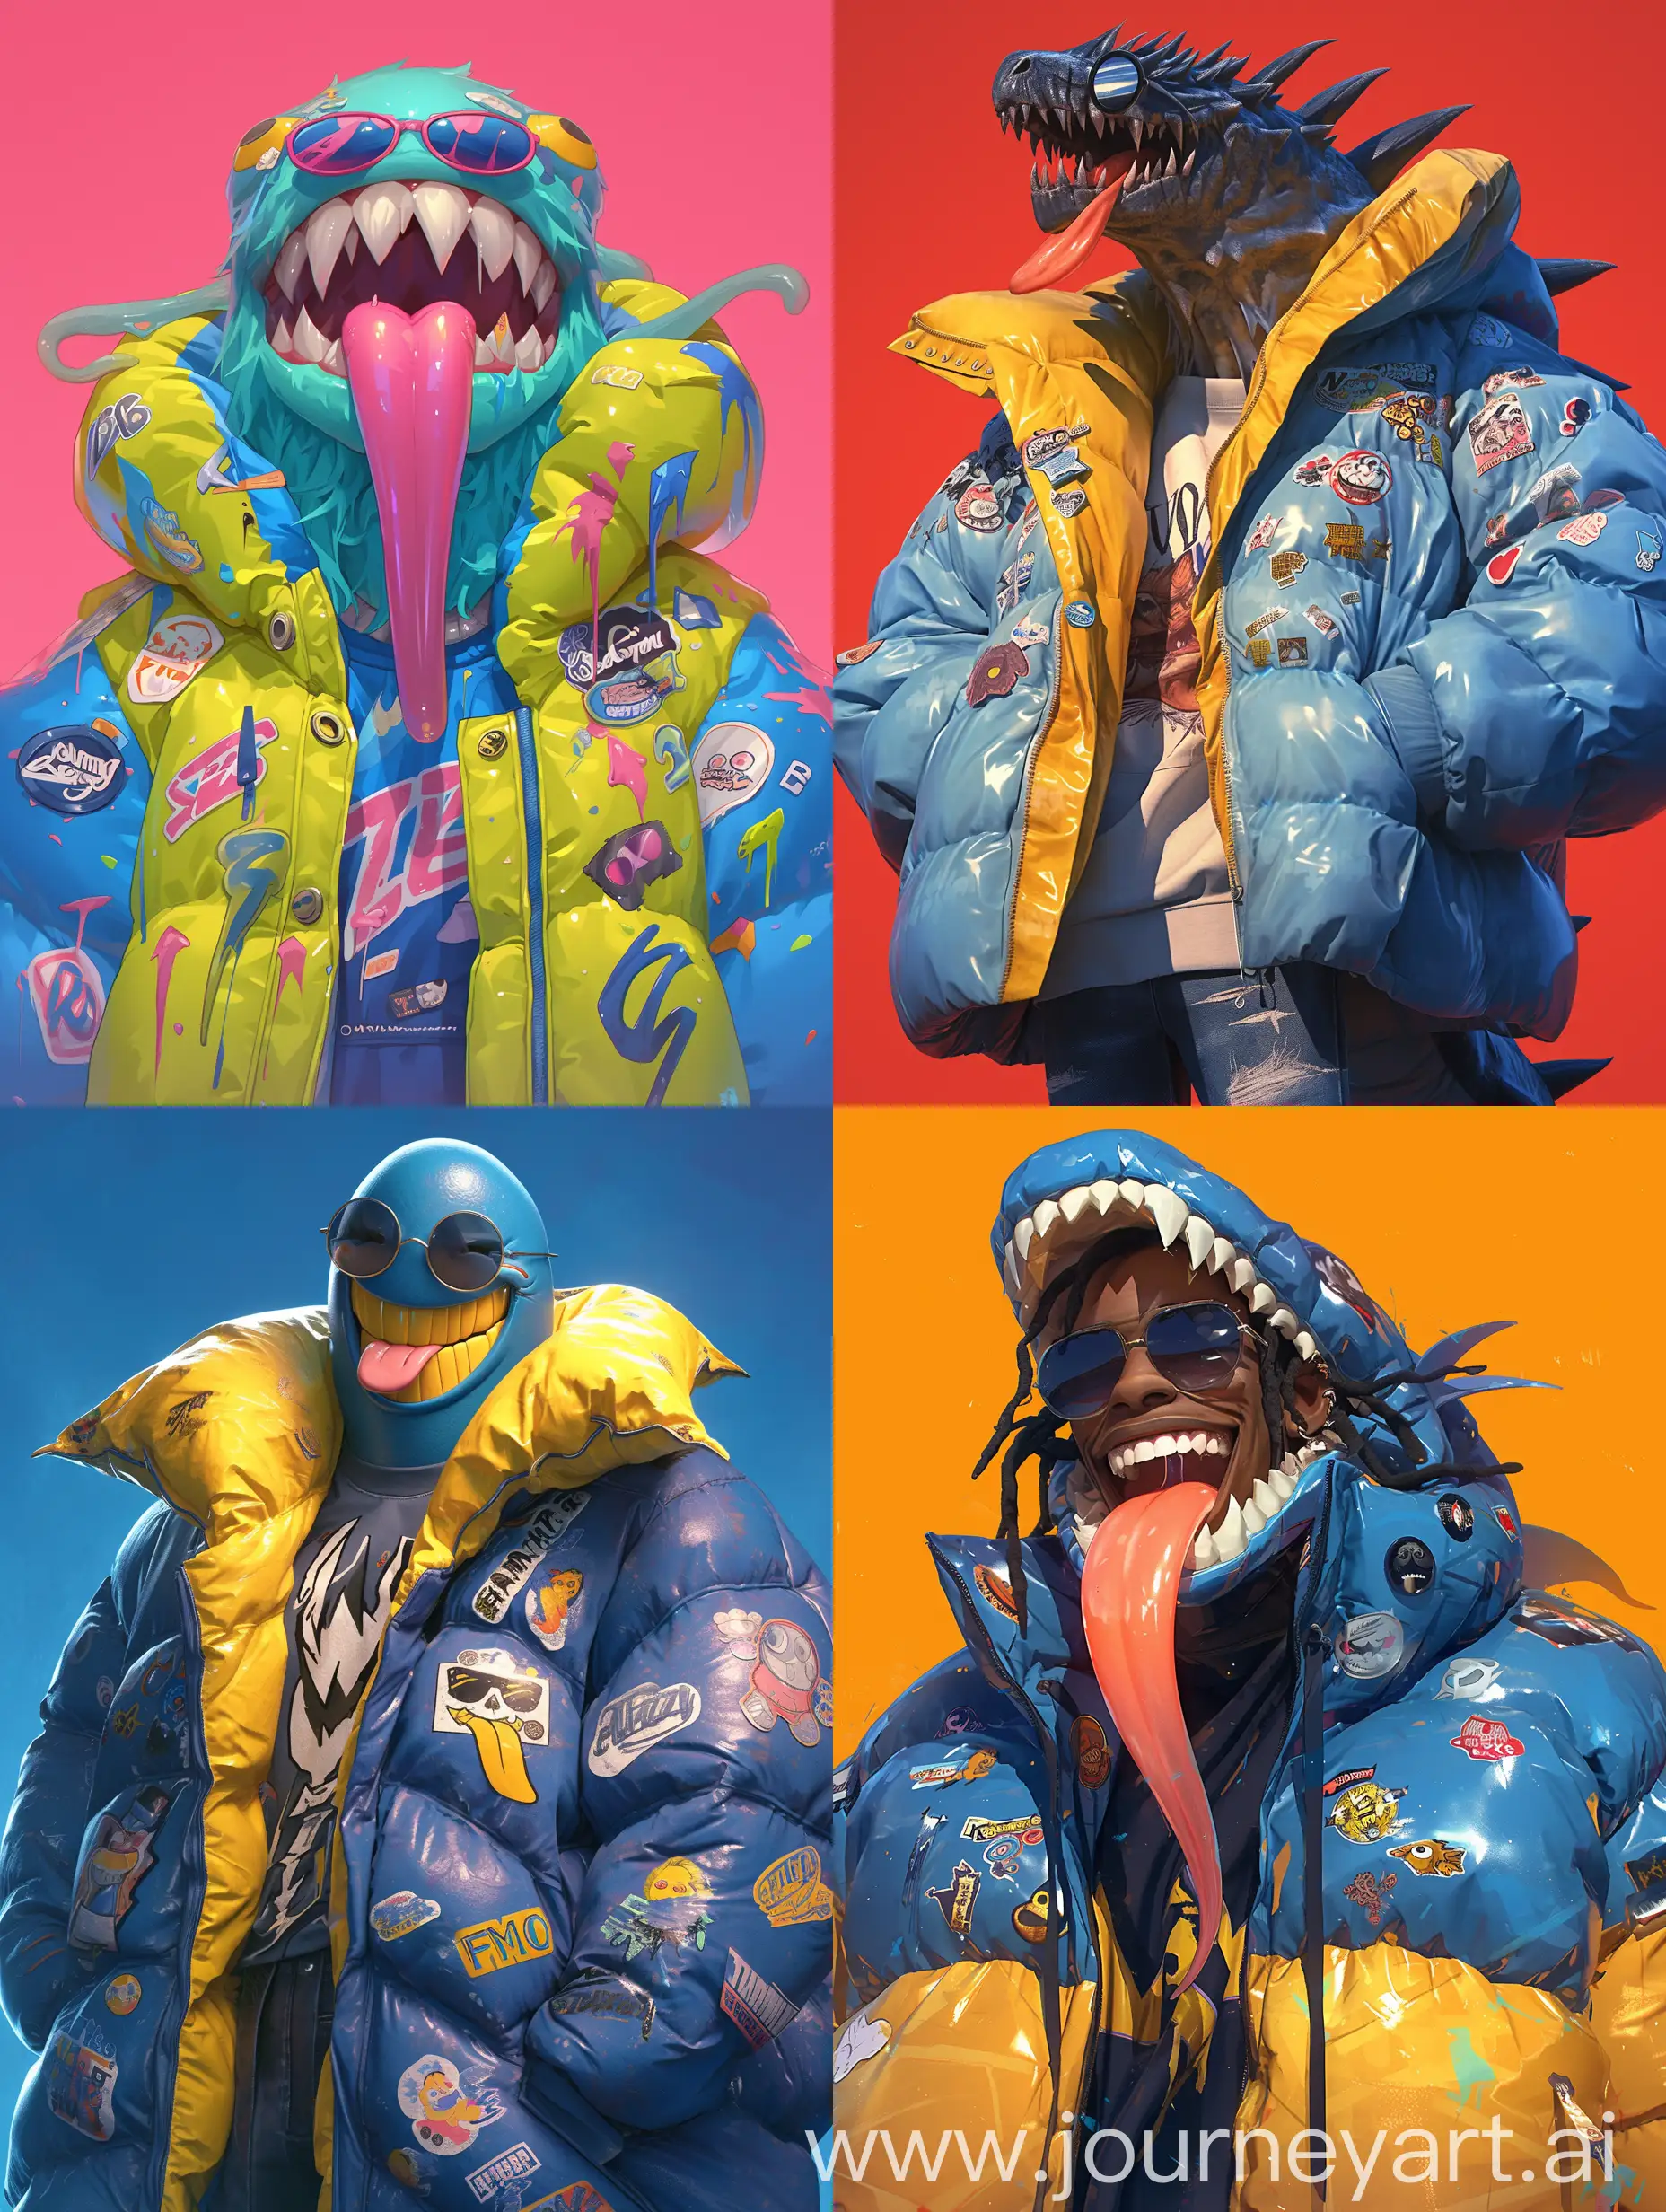 Colorful-Smiling-Monster-Character-with-Oversize-Puffy-Jacket-and-Unique-Accessories-3D-Rendered-CloseUp-Portrait